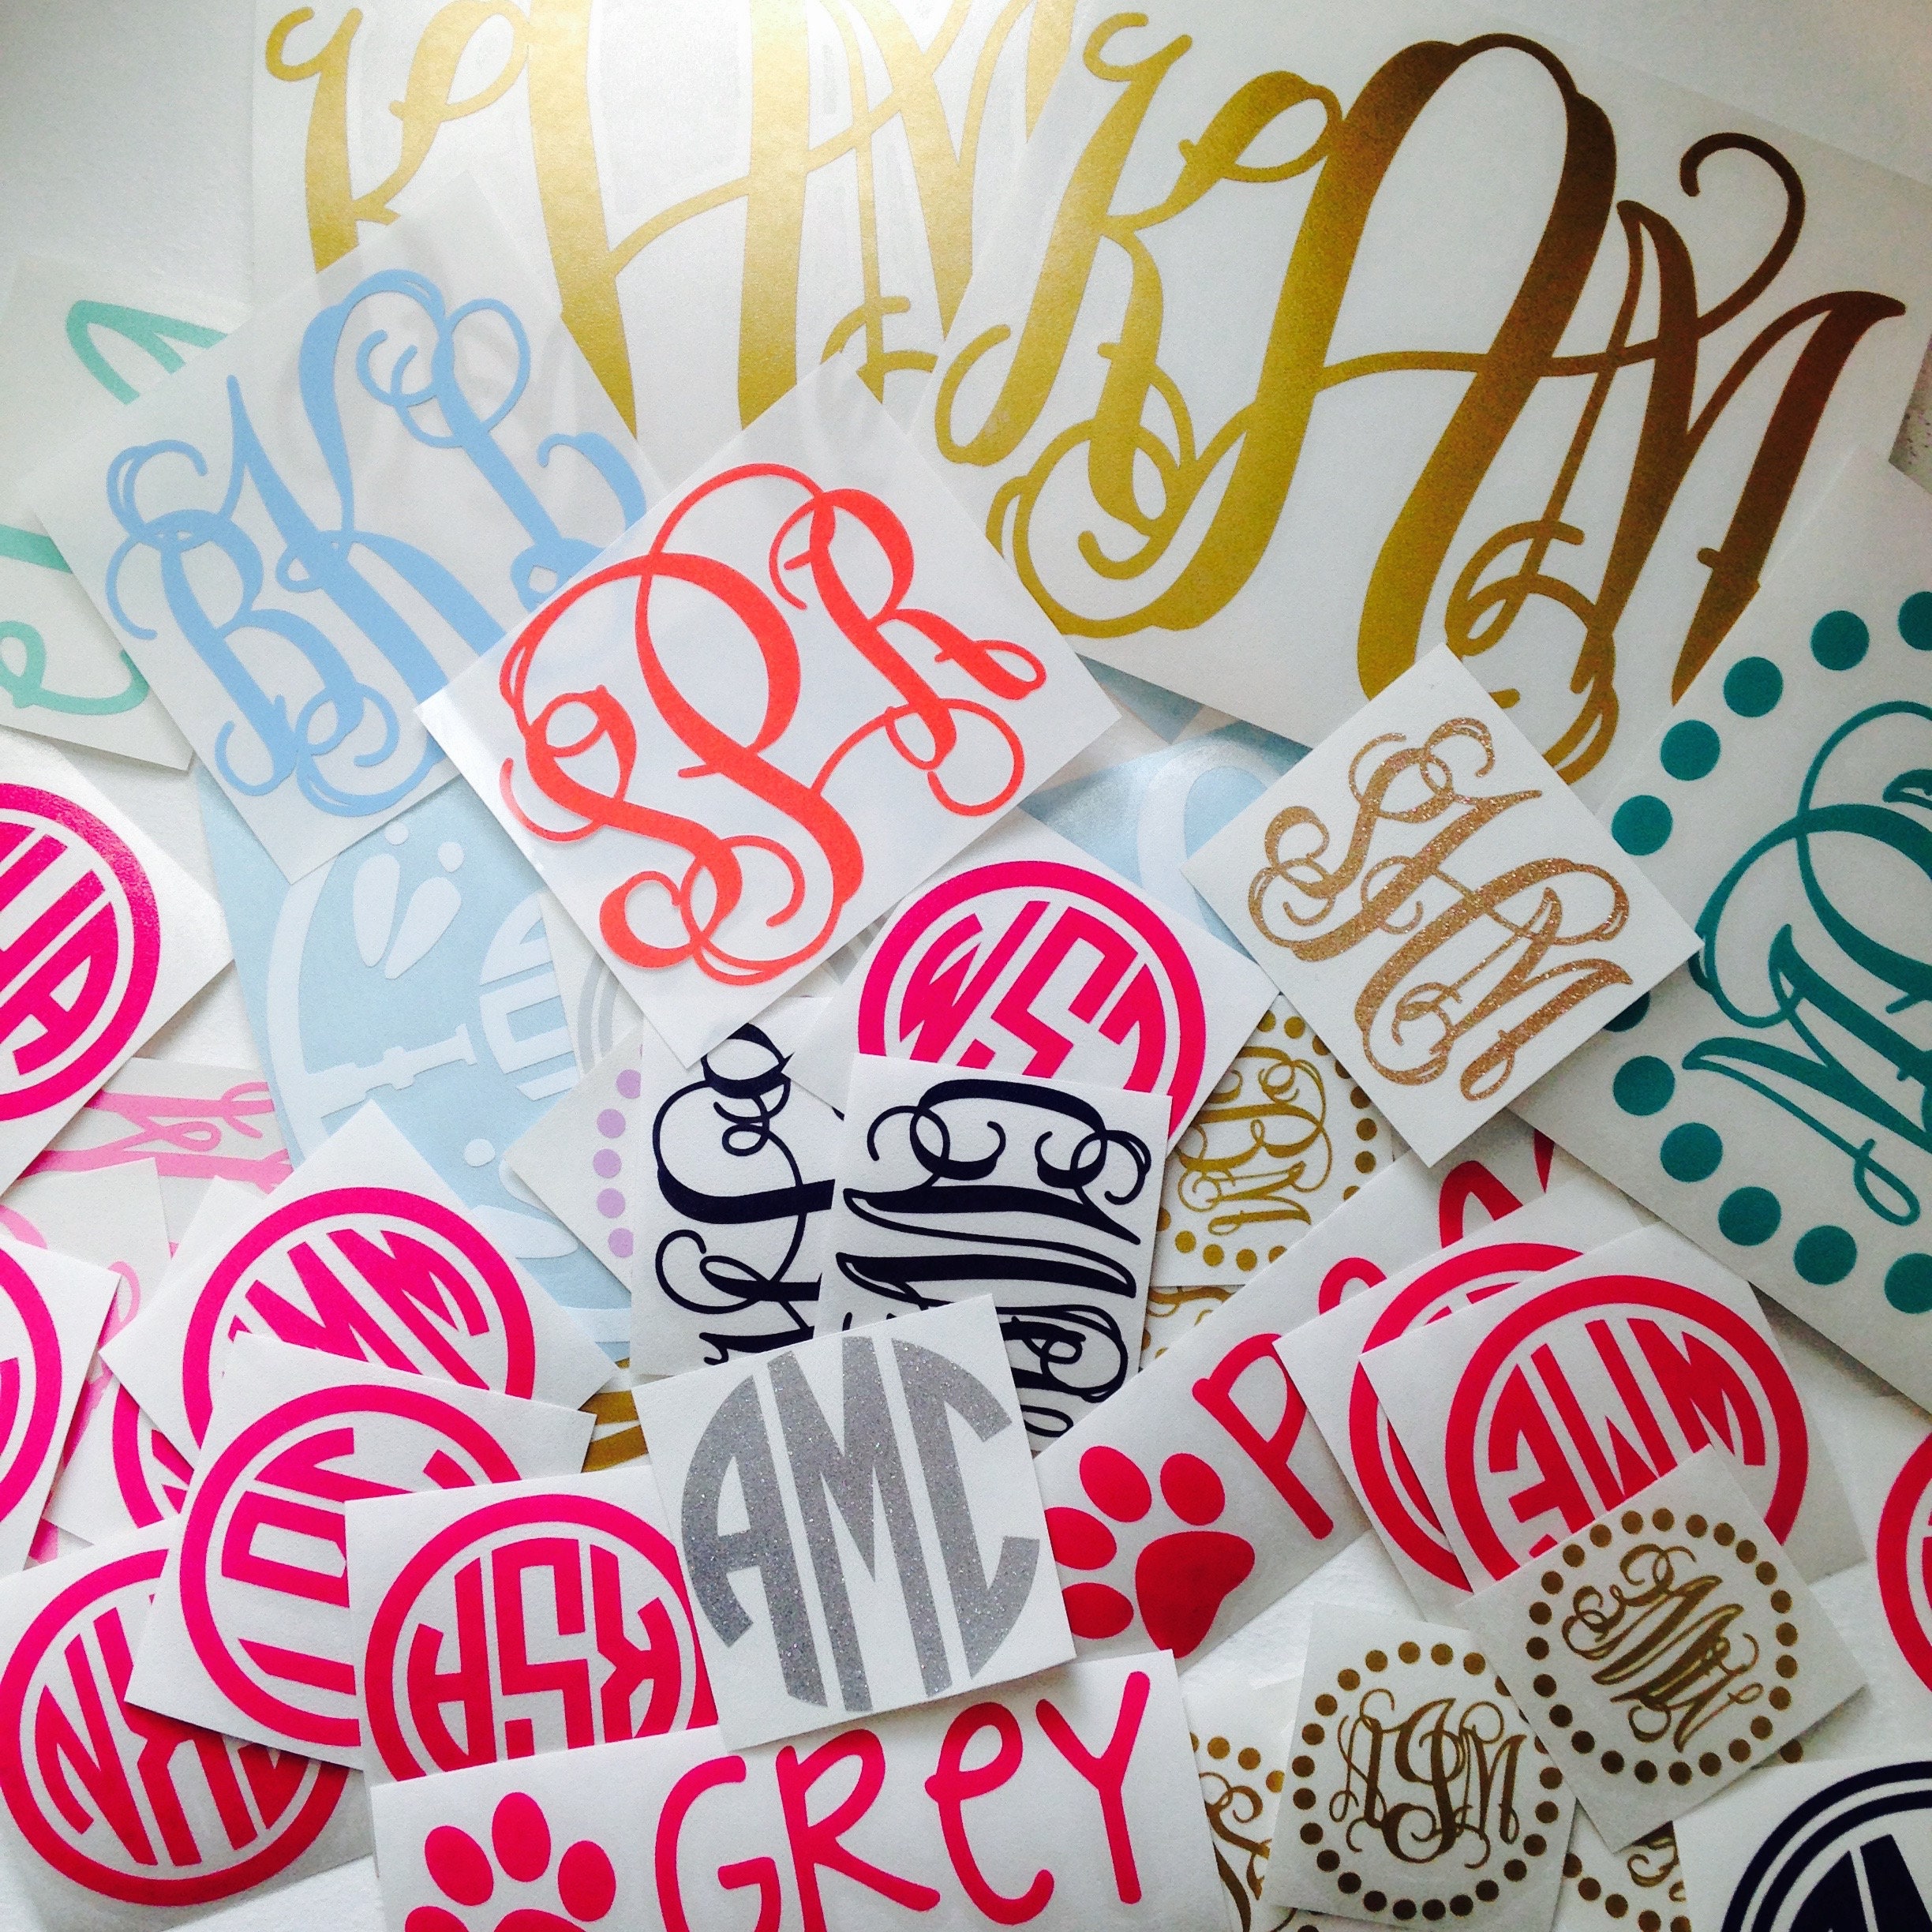 LARGE Monogram Decal Many Sizes & Colors 6 12 Inches 